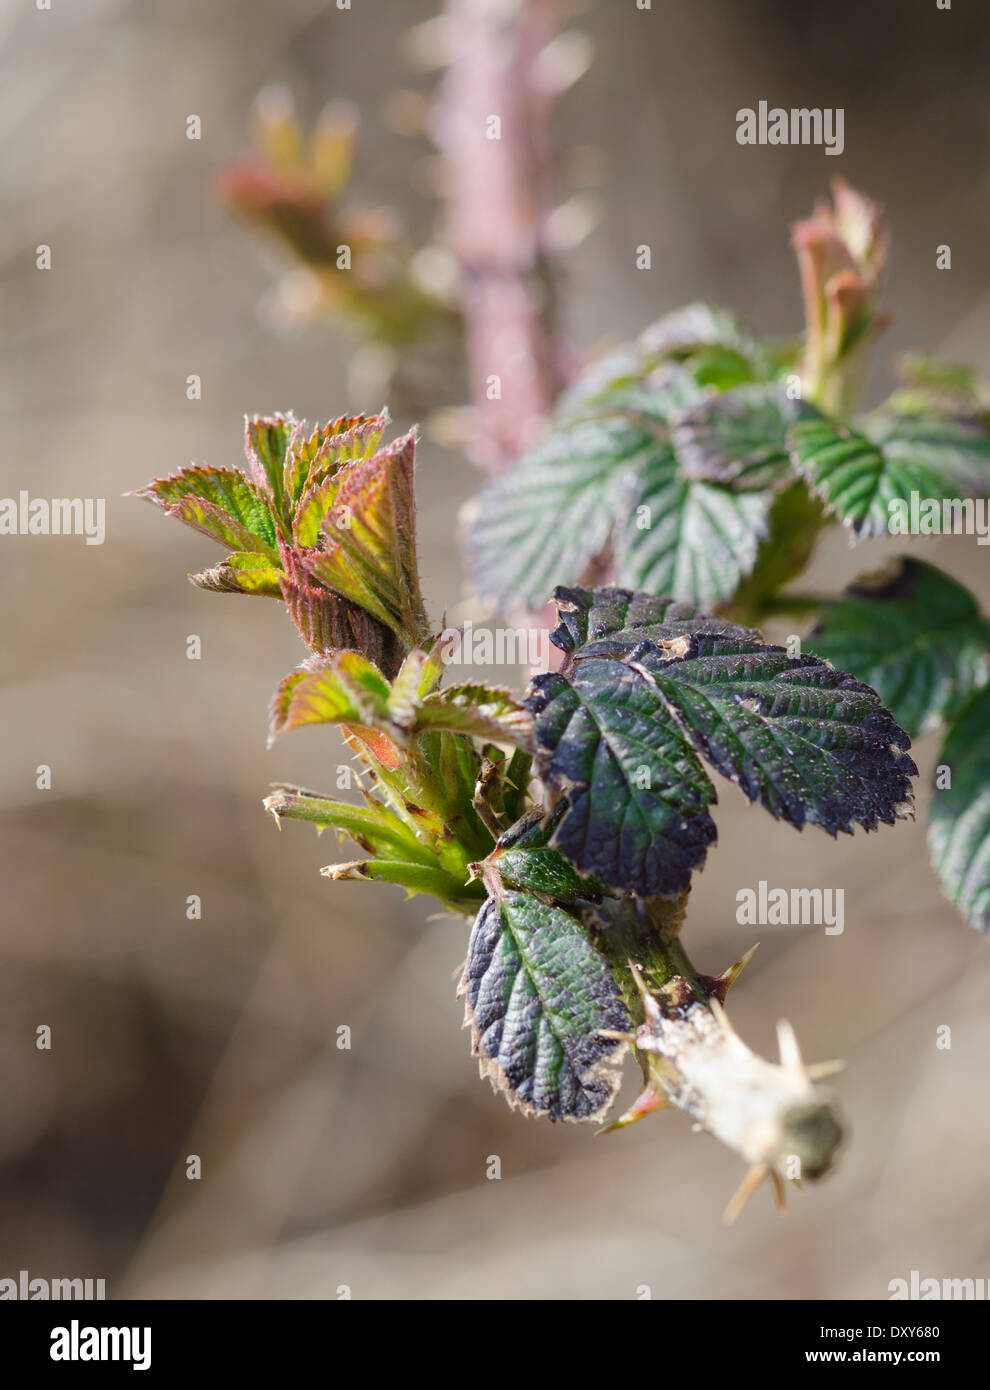 New spring growth on a Bramble branch in Cumbria, England Stock Photo